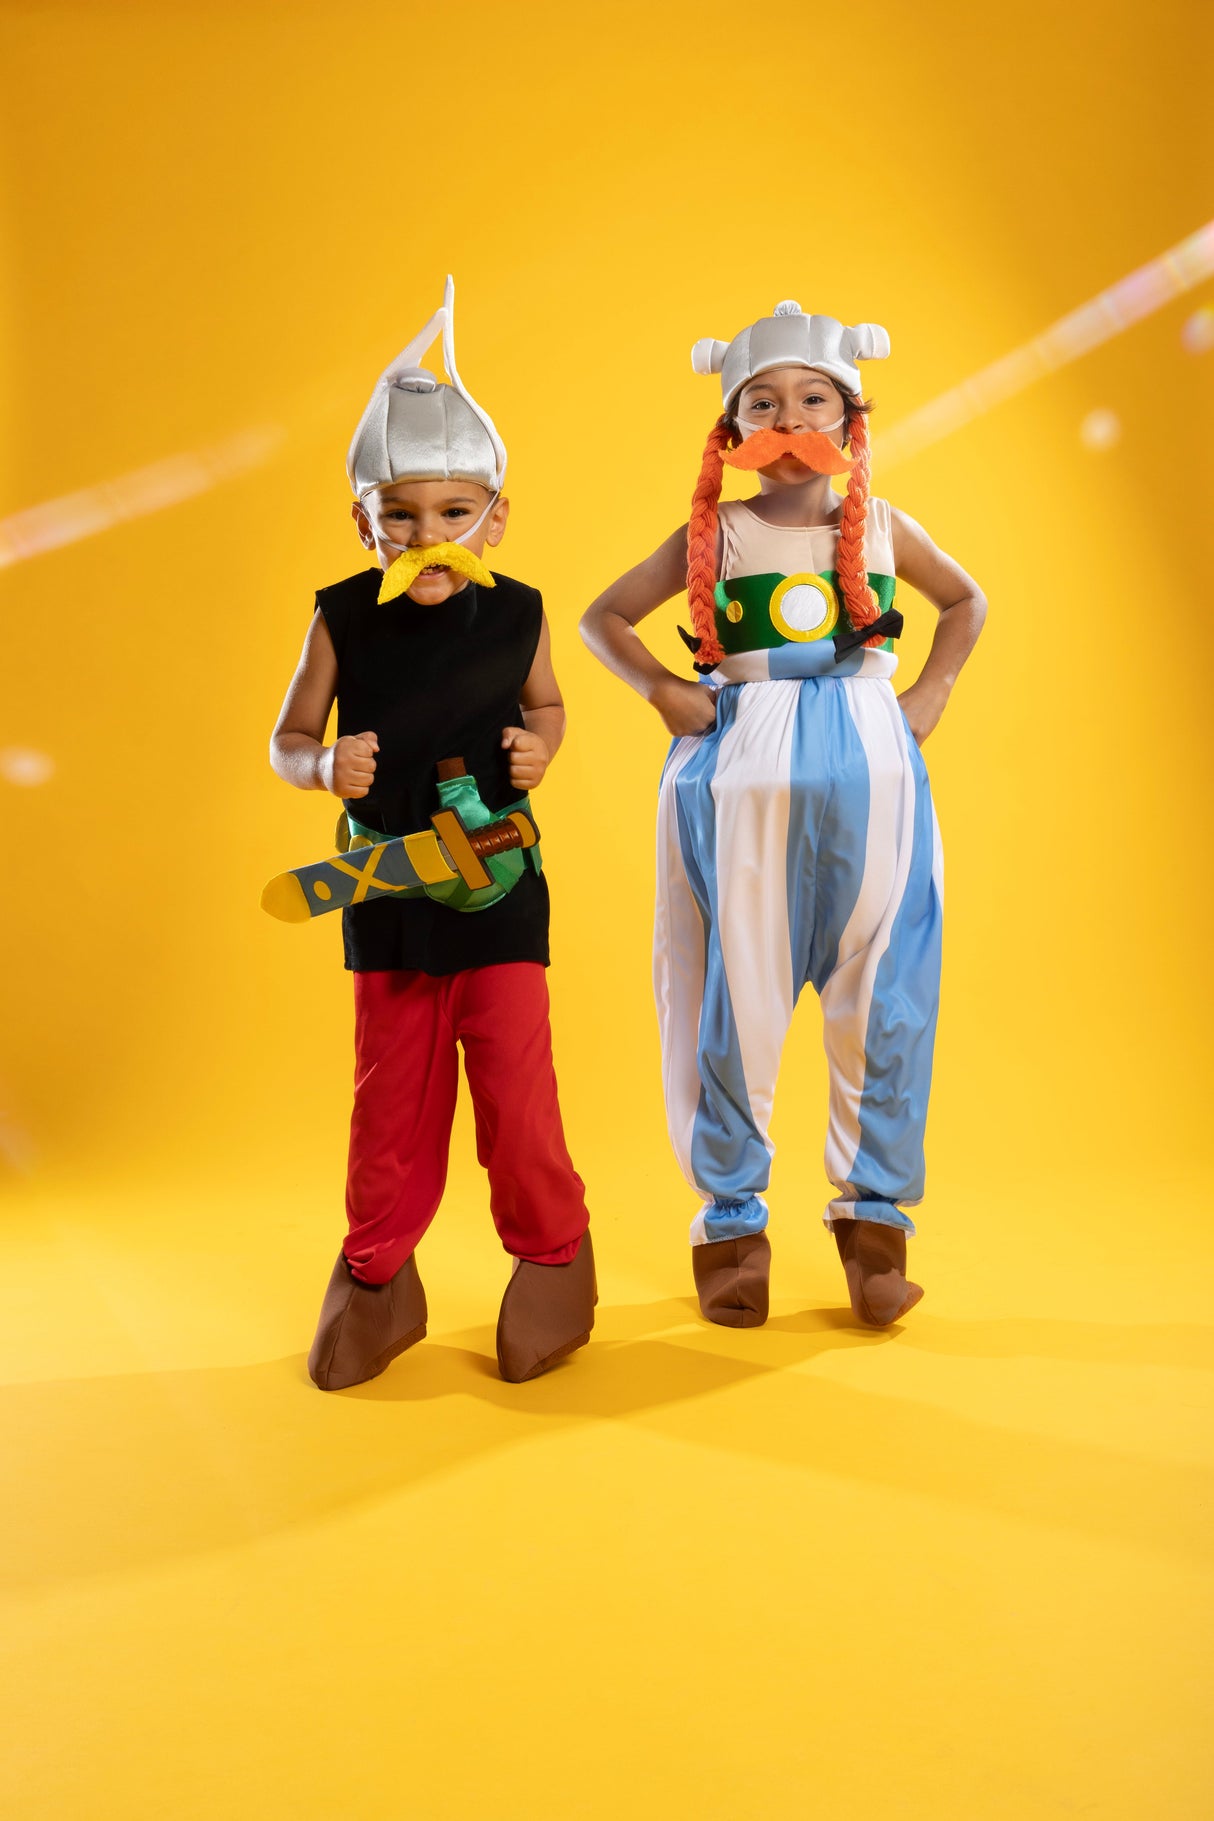 CHAKS Costumes Asterix Costume for Kids, Asterix and Obelix